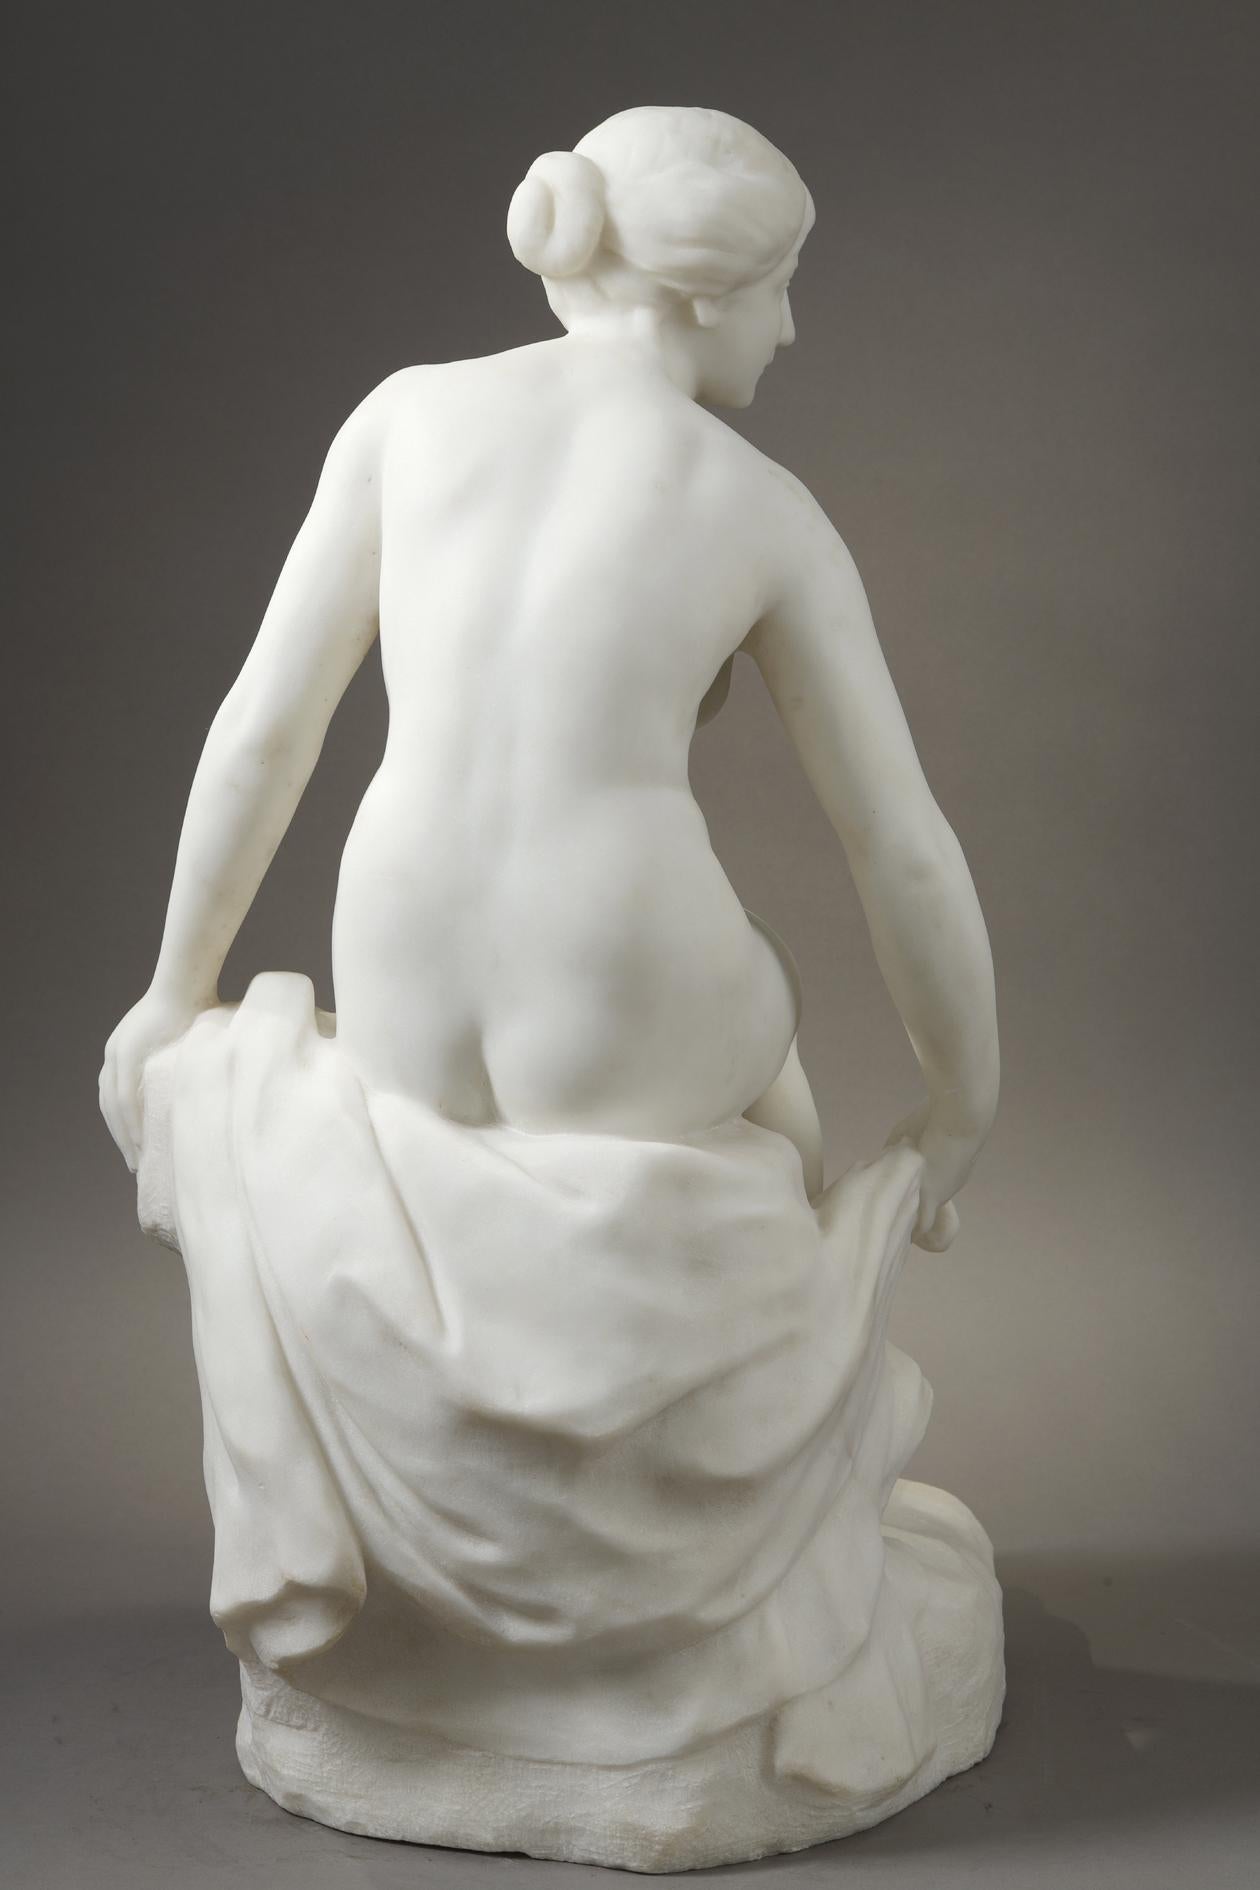 Bather
by Etienne Hachenburger (19th-20th C.)

Sculpture in white Carrara marble
Signed on the side of the base 